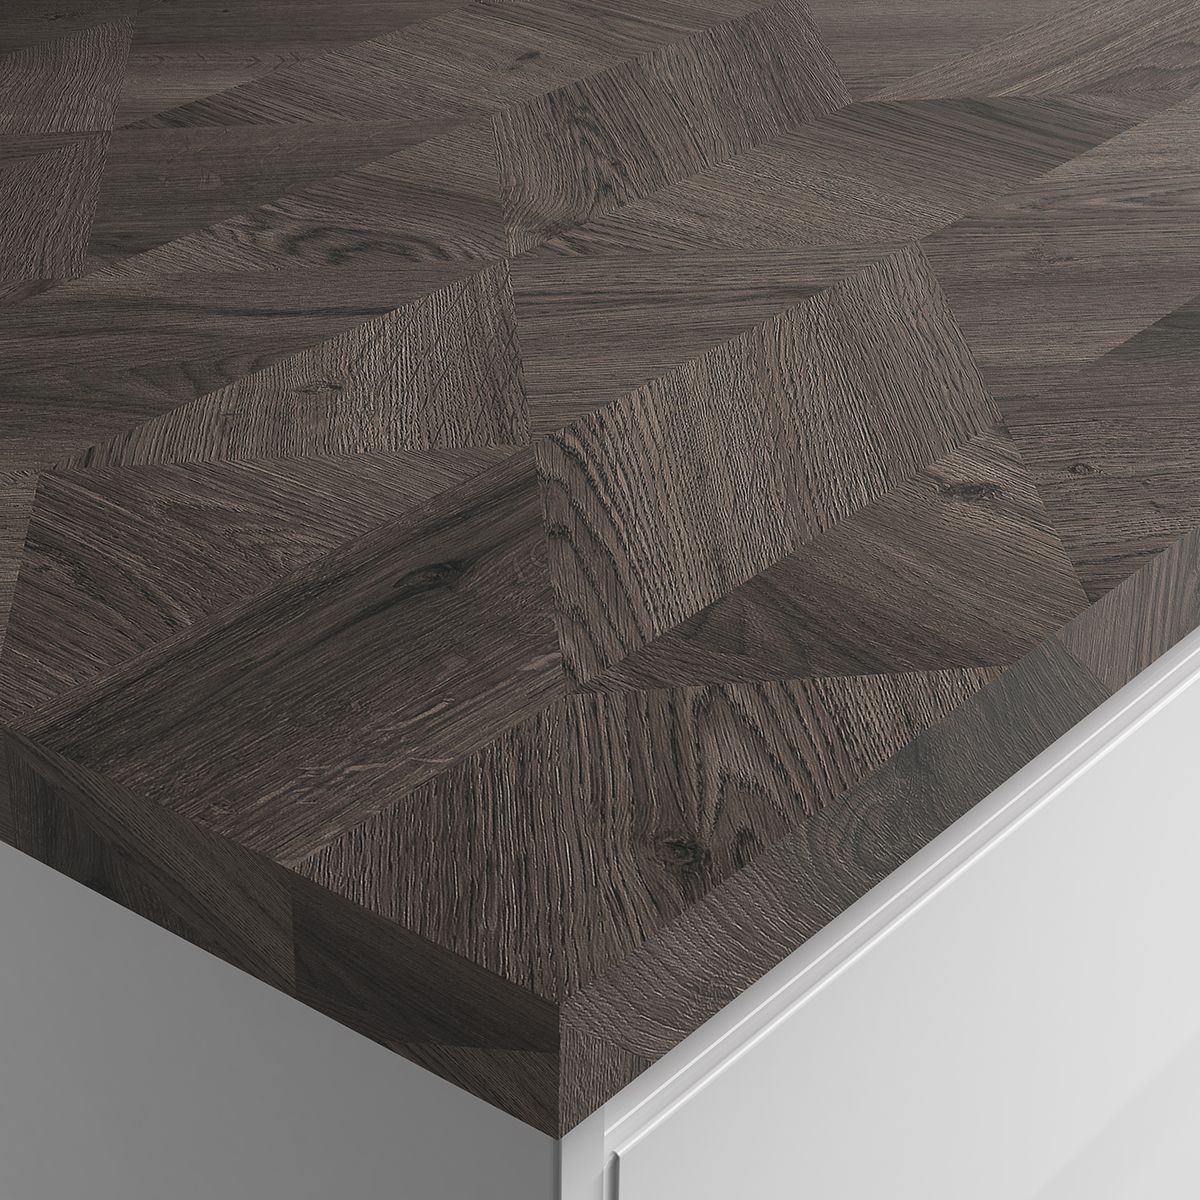 Image of Wickes Laminate Square Edge Worktop - Edgy Wood 600mm x 38mm x 3m